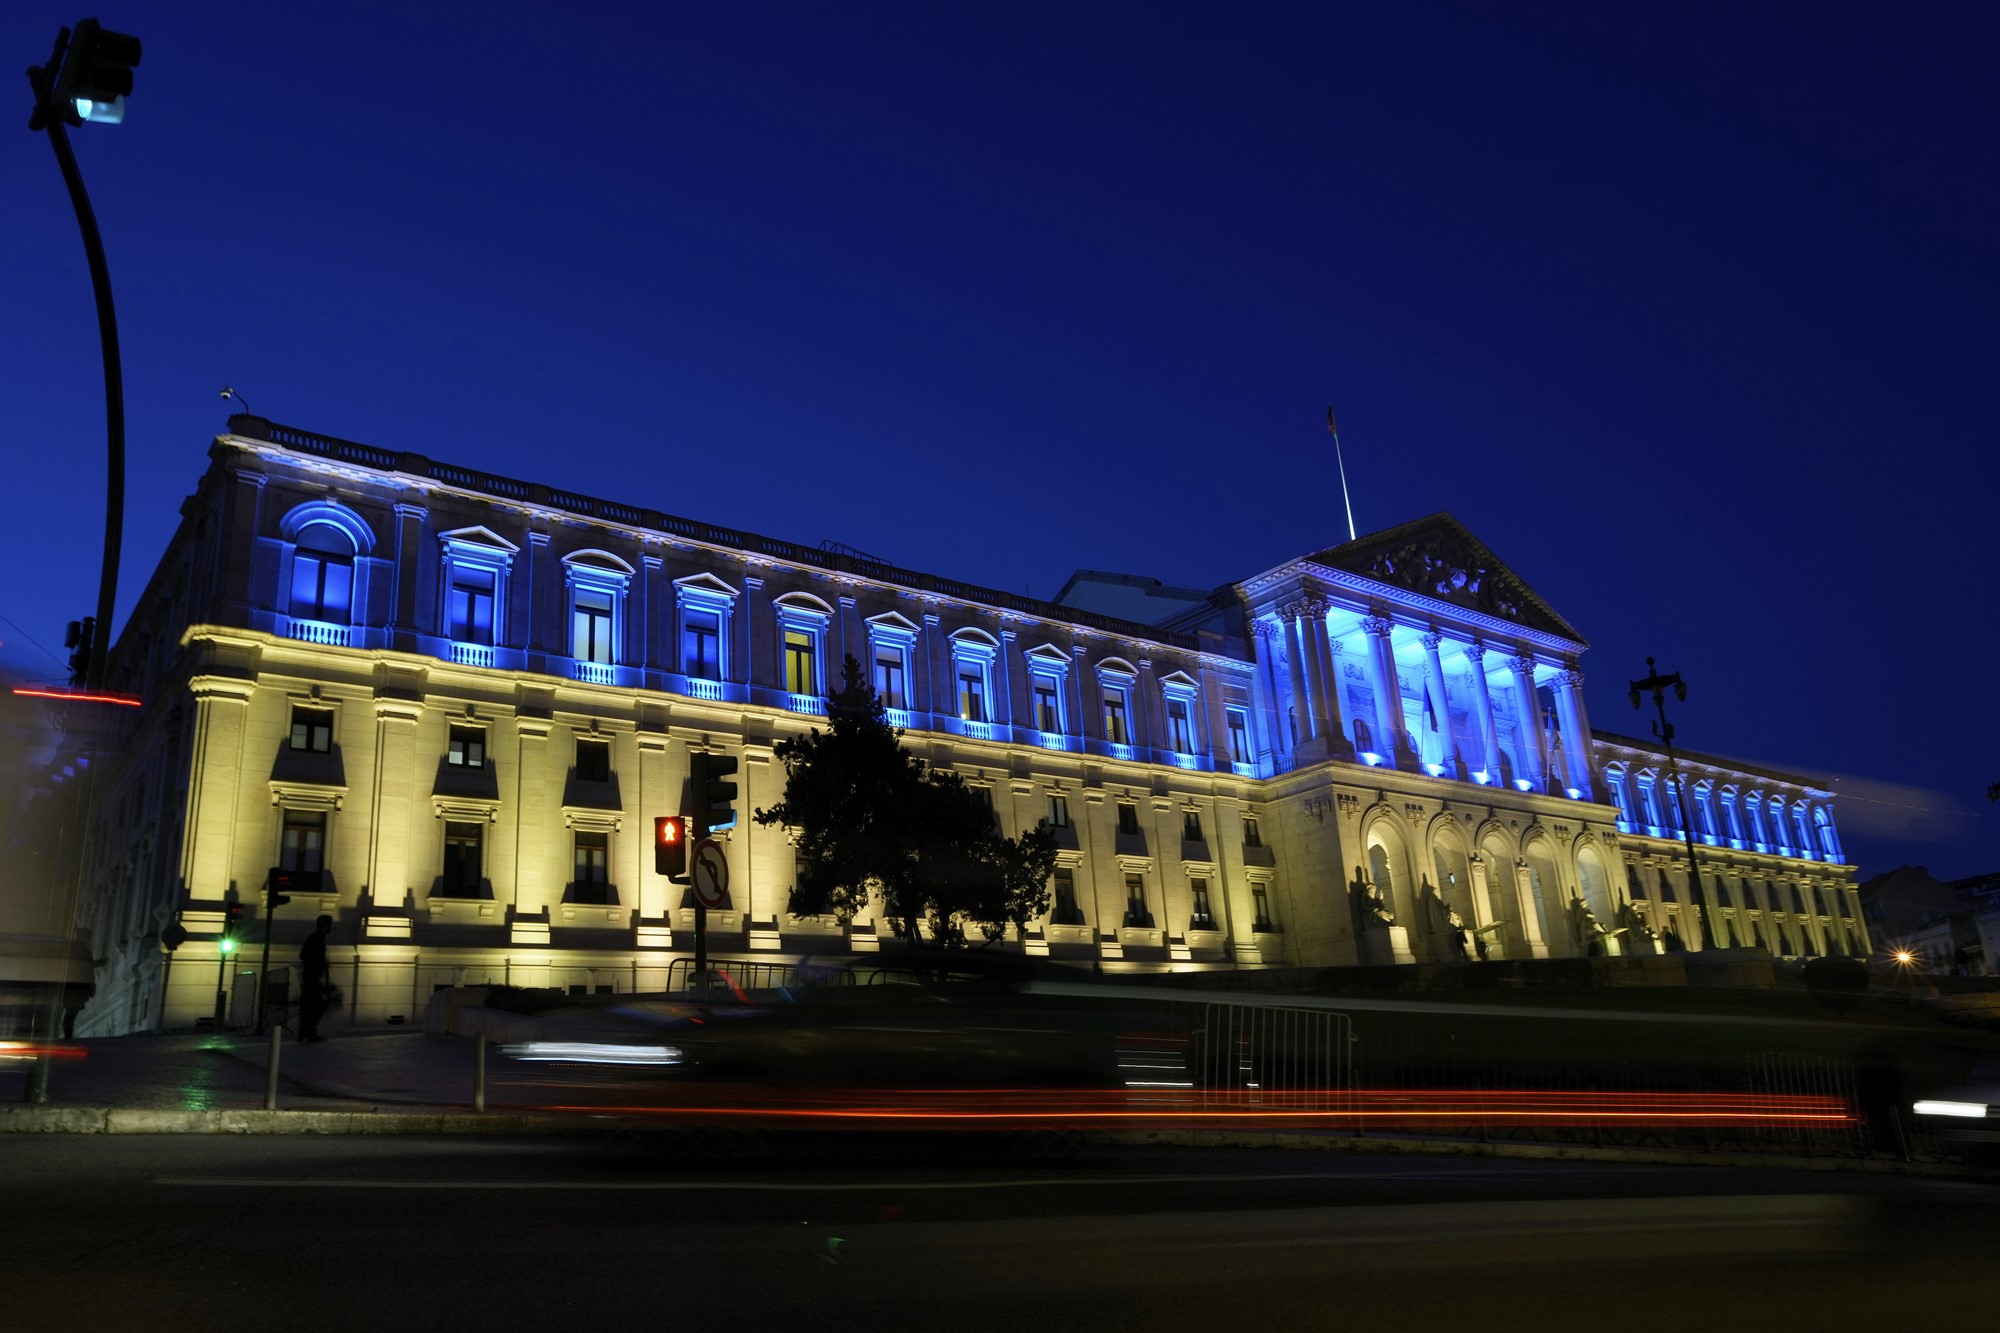 A government building lit up in blue and yellow.